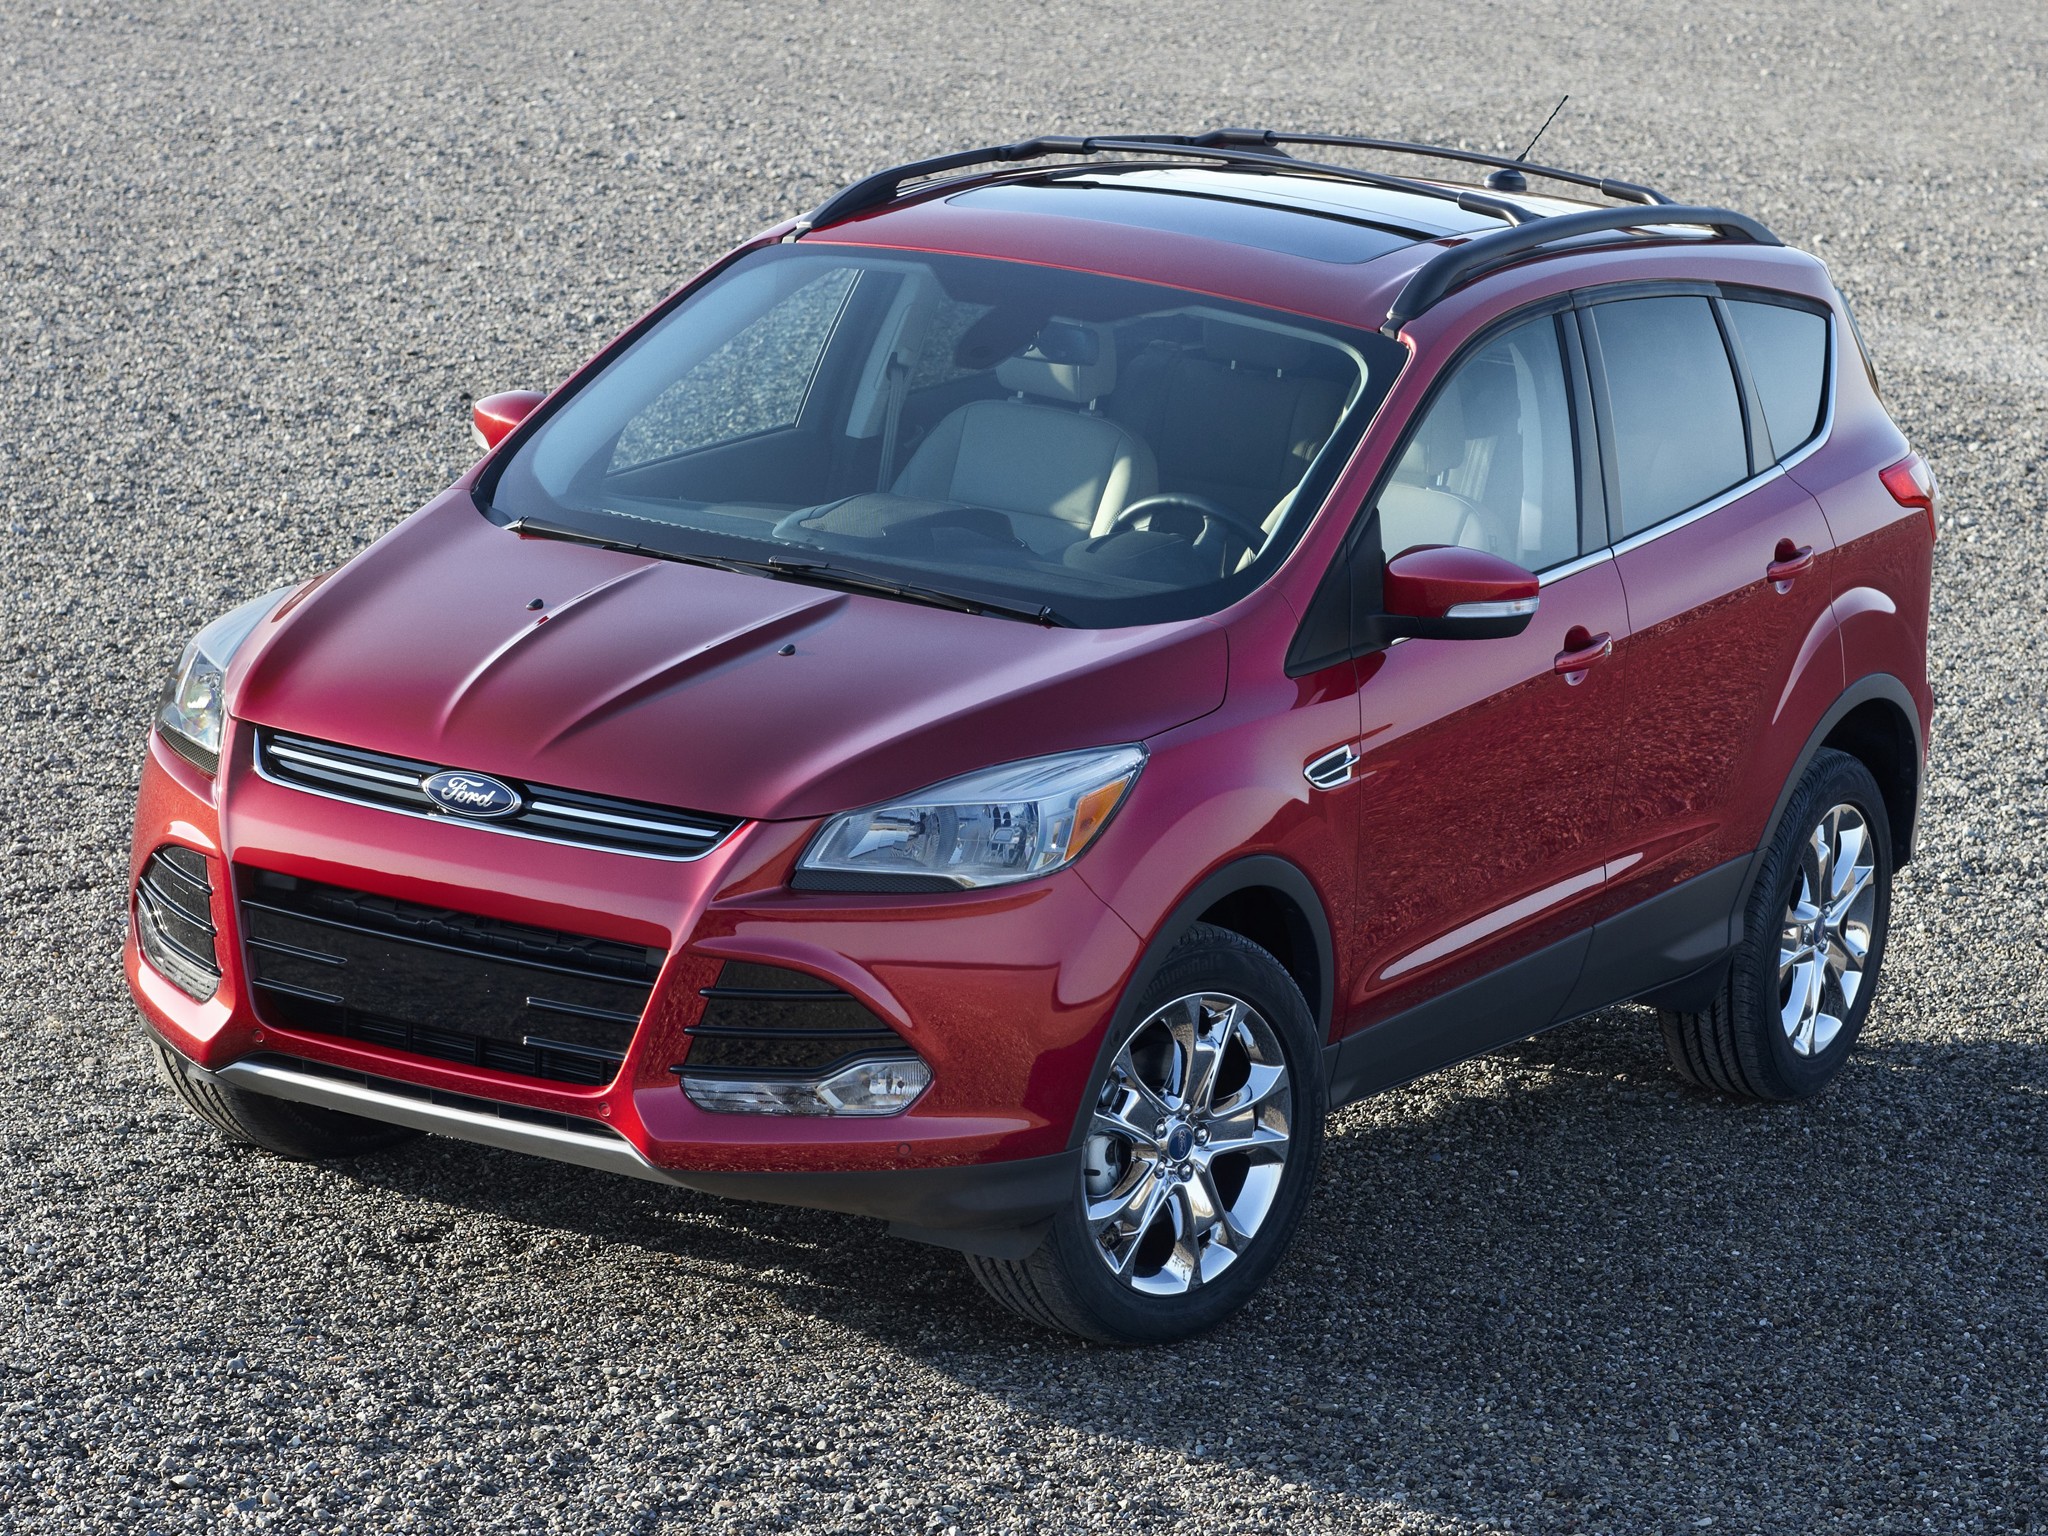 2016 Ford Escape, Specifications - Car Specs